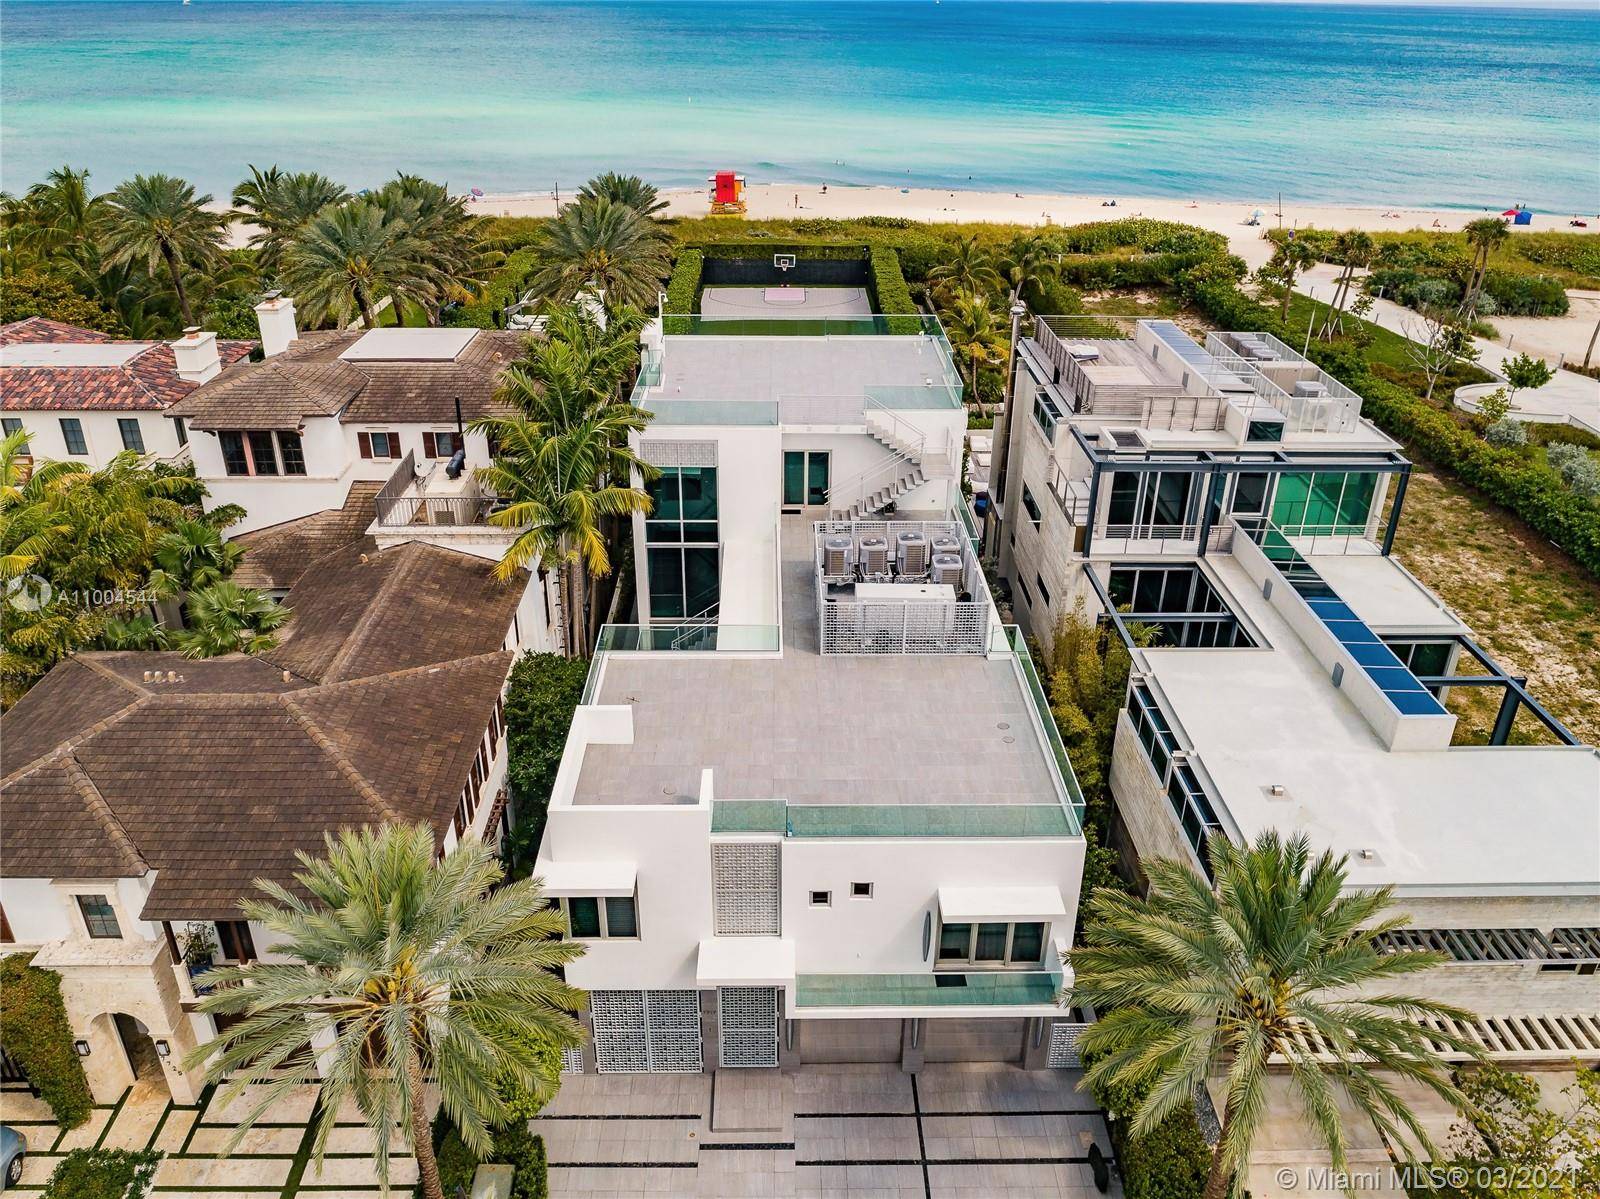 Enter to this exclusive home in the white sandy beaches of the Atlantic Ocean of Miami.